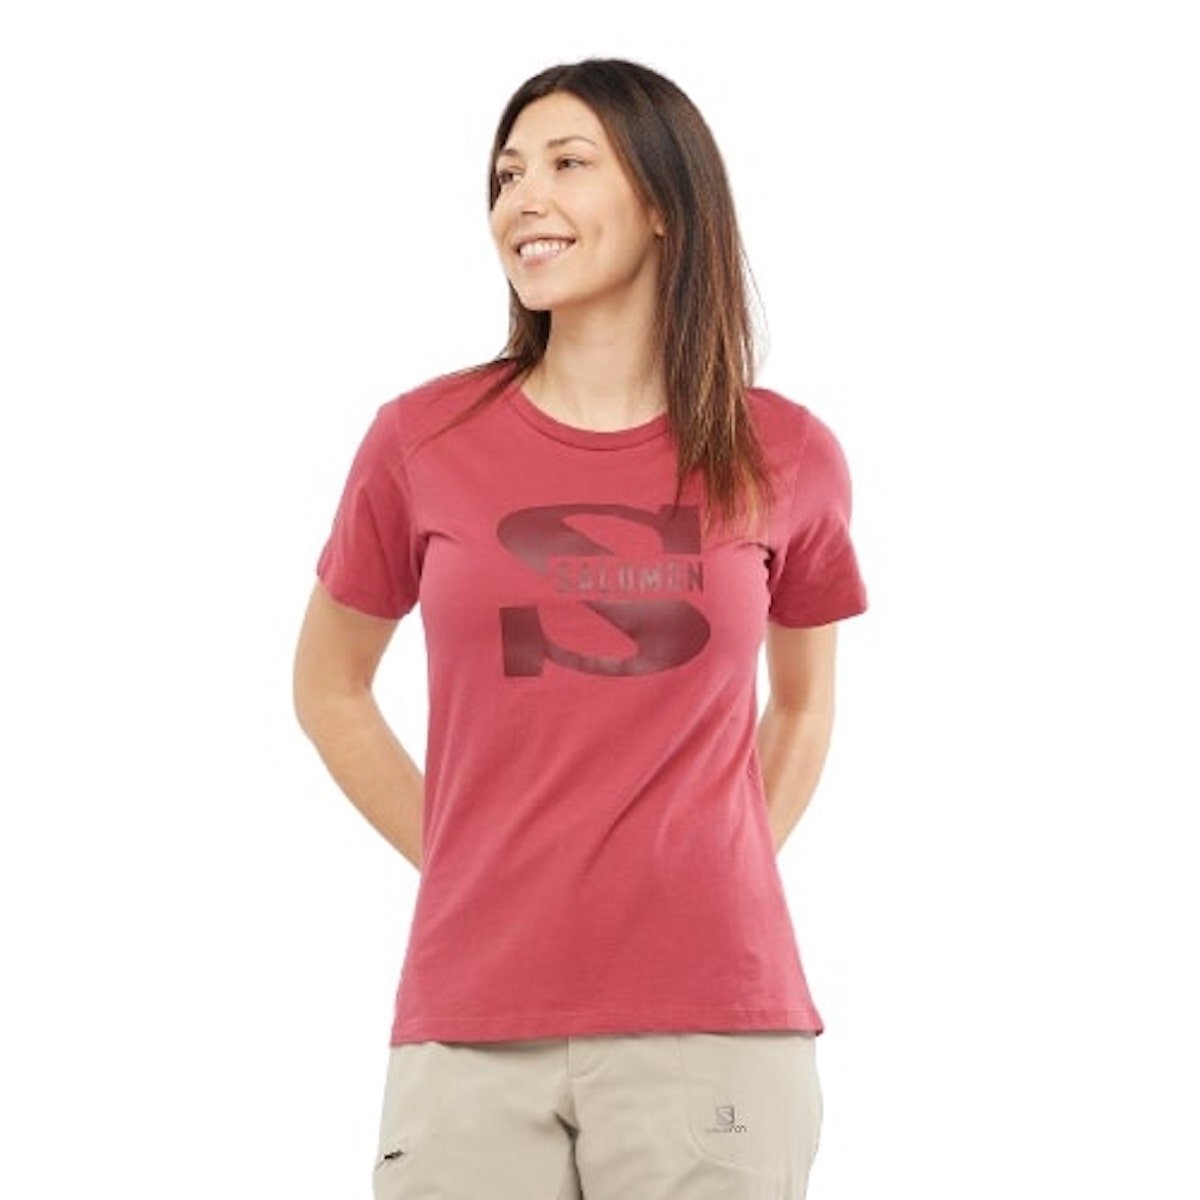 LC1798100_0_MOD_outlifebiglogotee_earthred_sportswear_w.png.cq5dam.web.1200.1200-removebg-preview